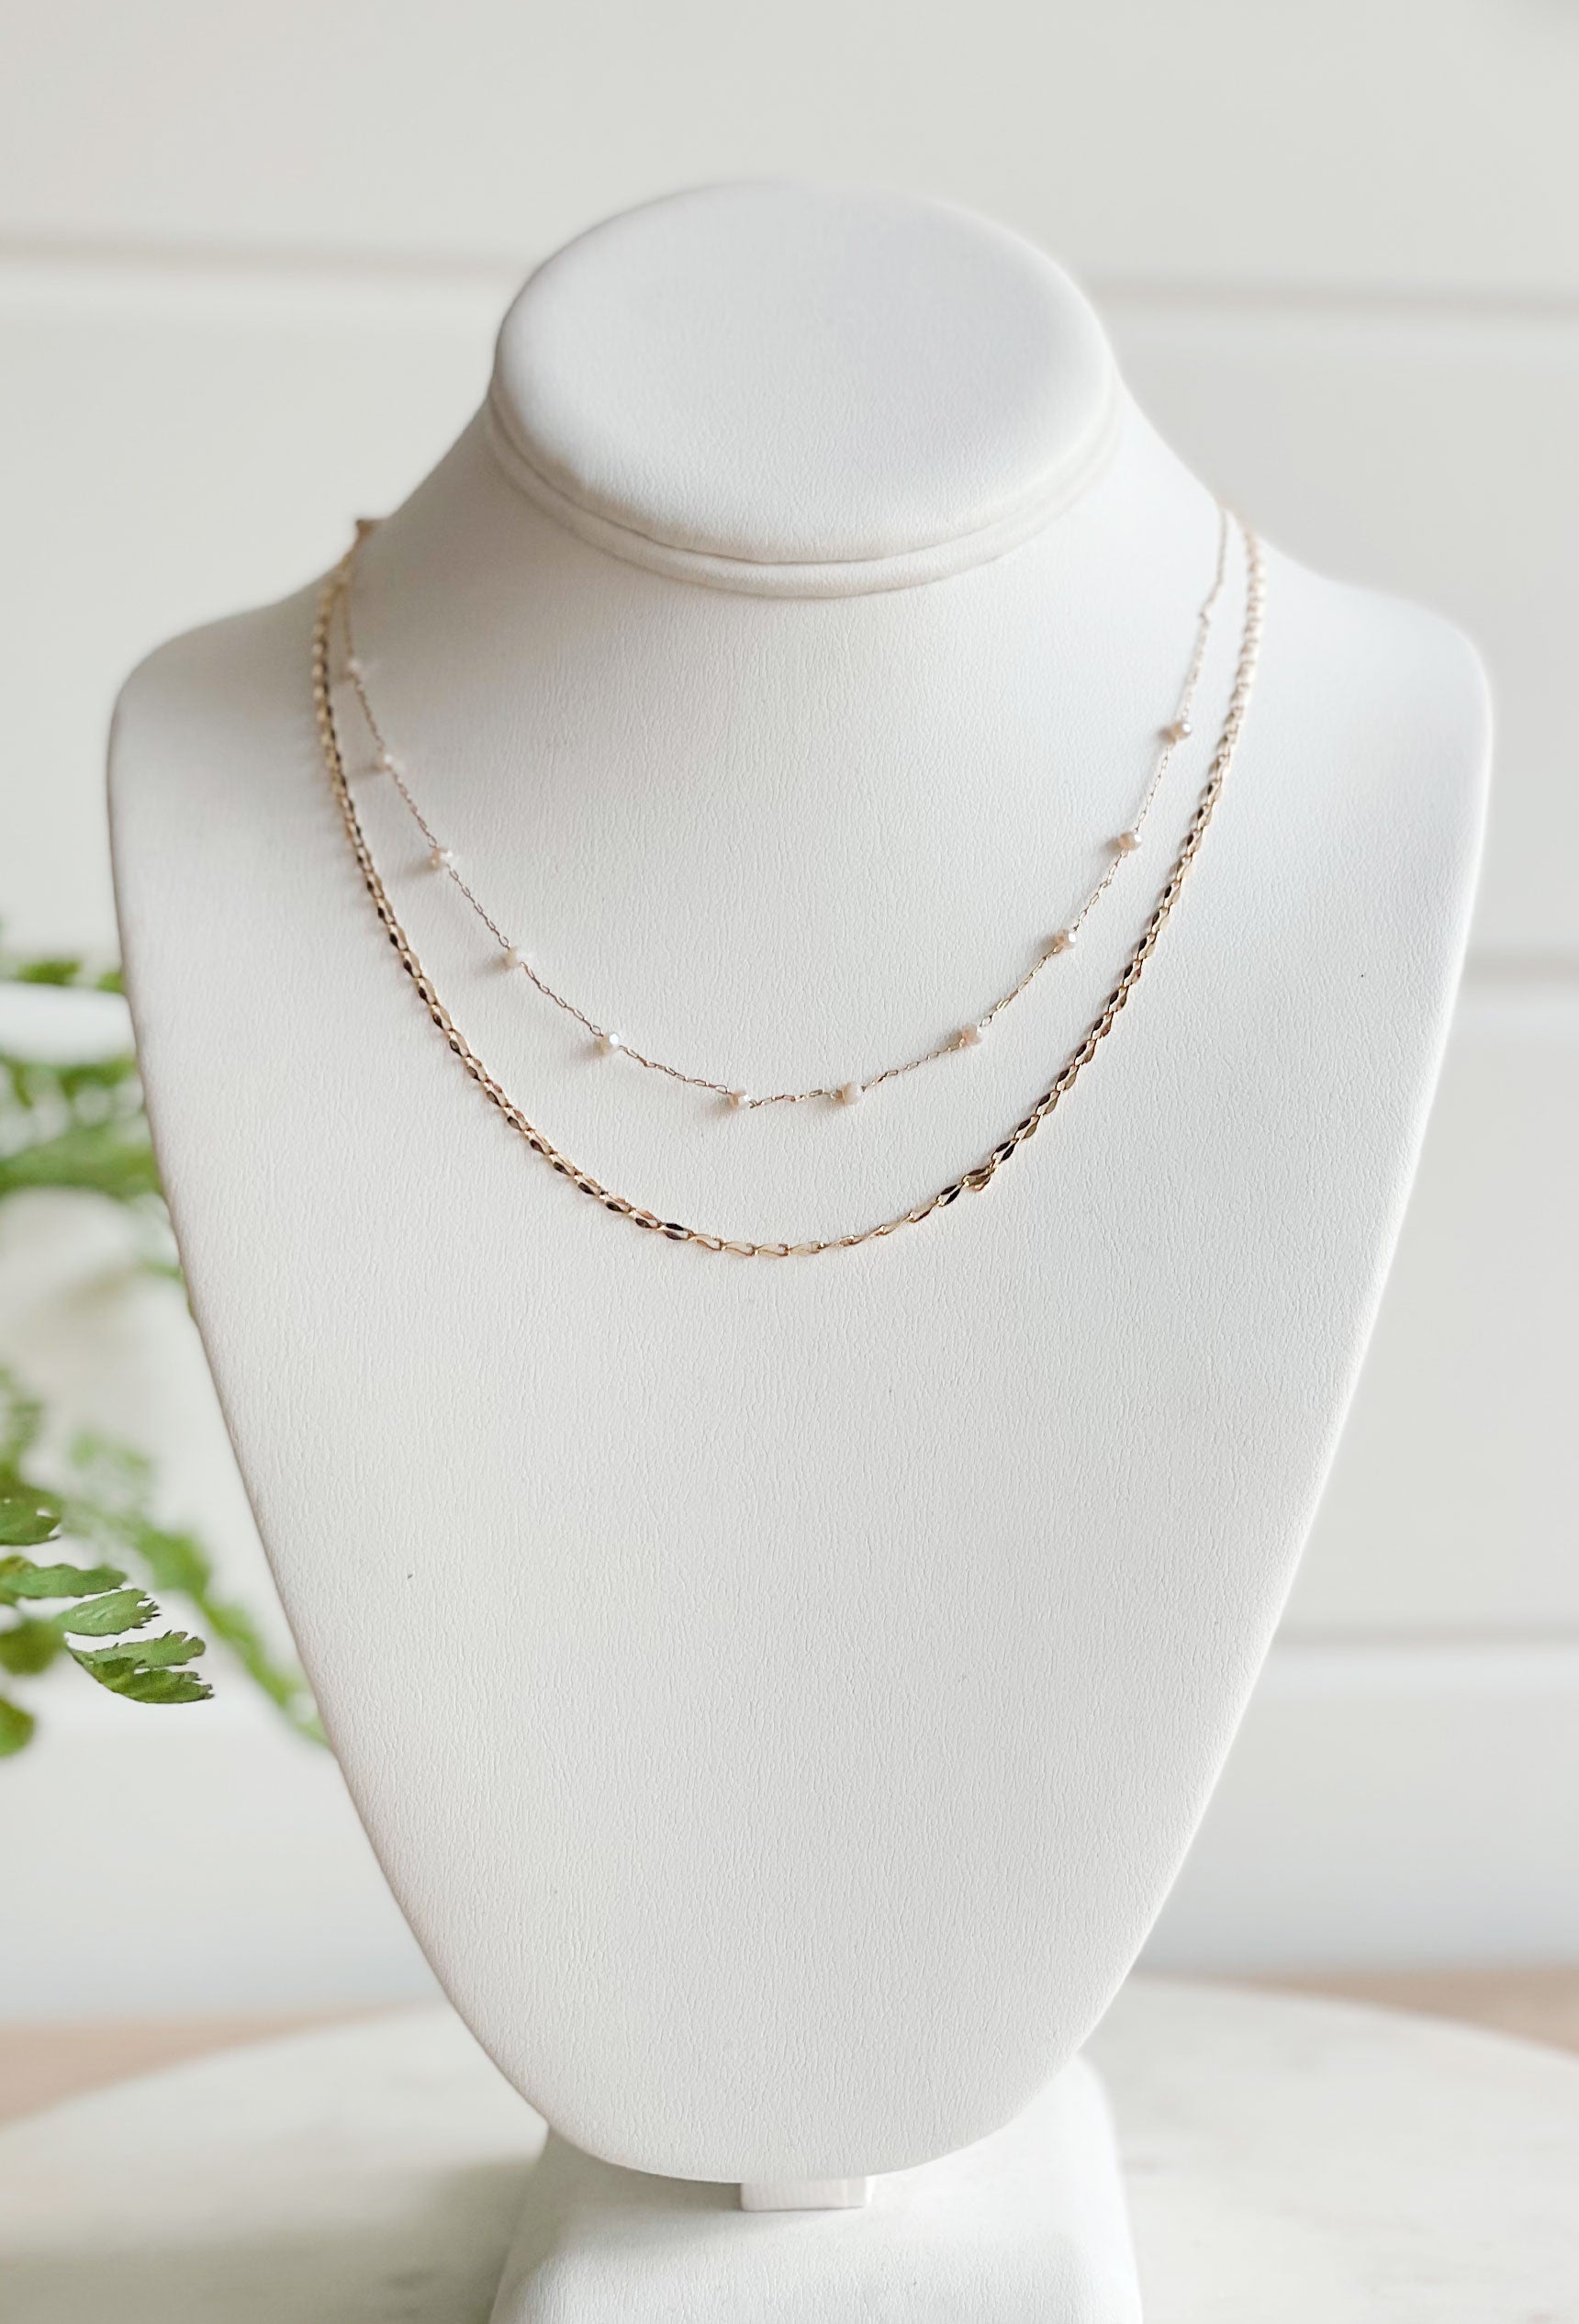 Falling For You Necklace, single dainty gold chain necklace with white beaded detail and a lobster clasp